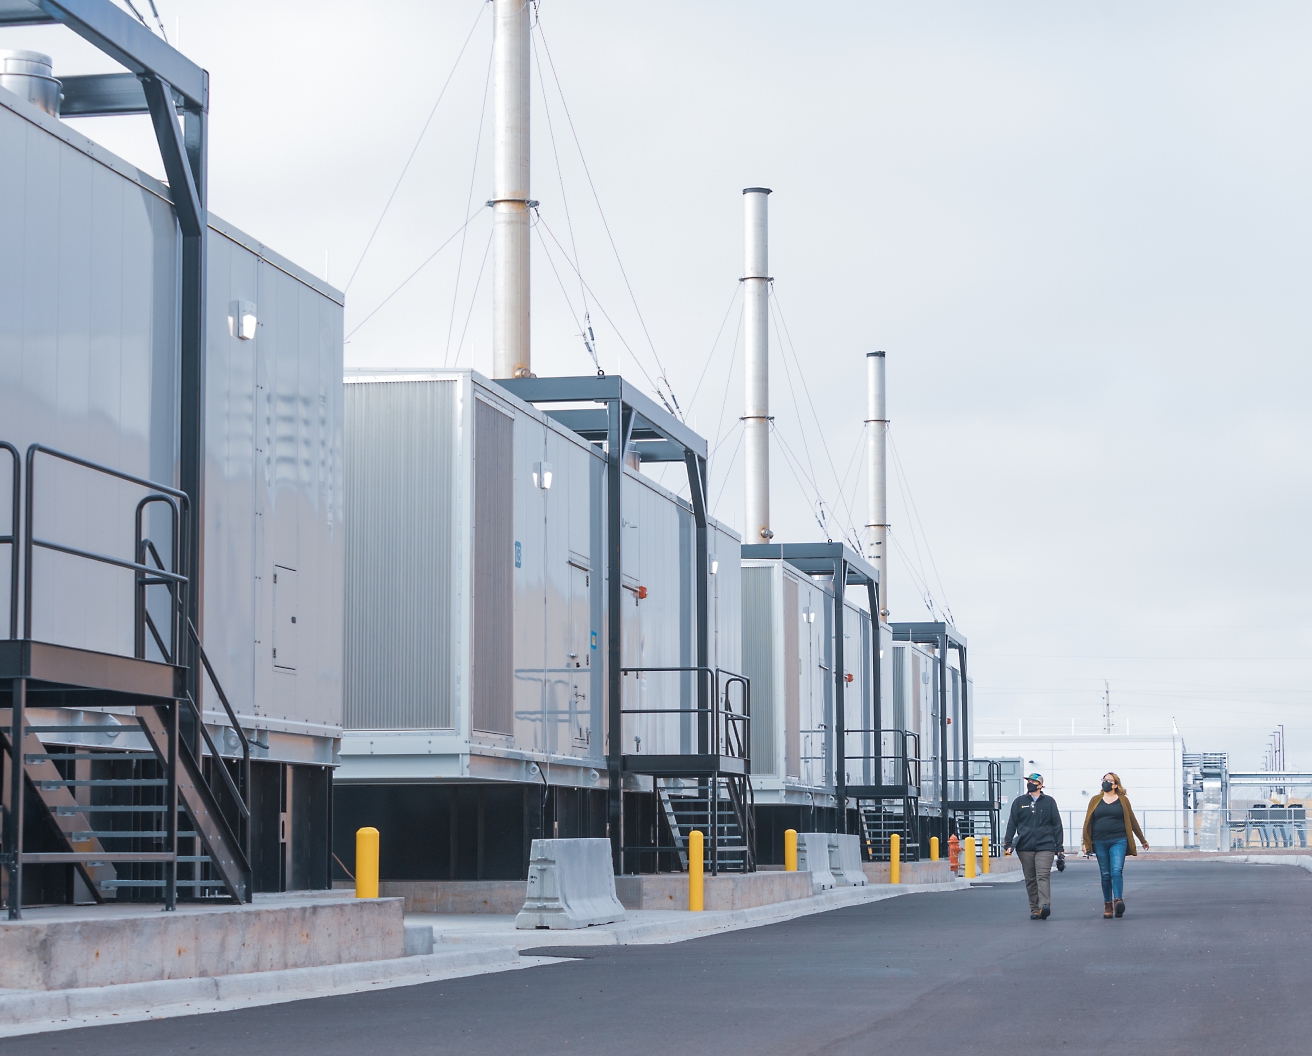 Two people walking by a row of industrial containers with tall chimneys at a facility, under an overcast sky.